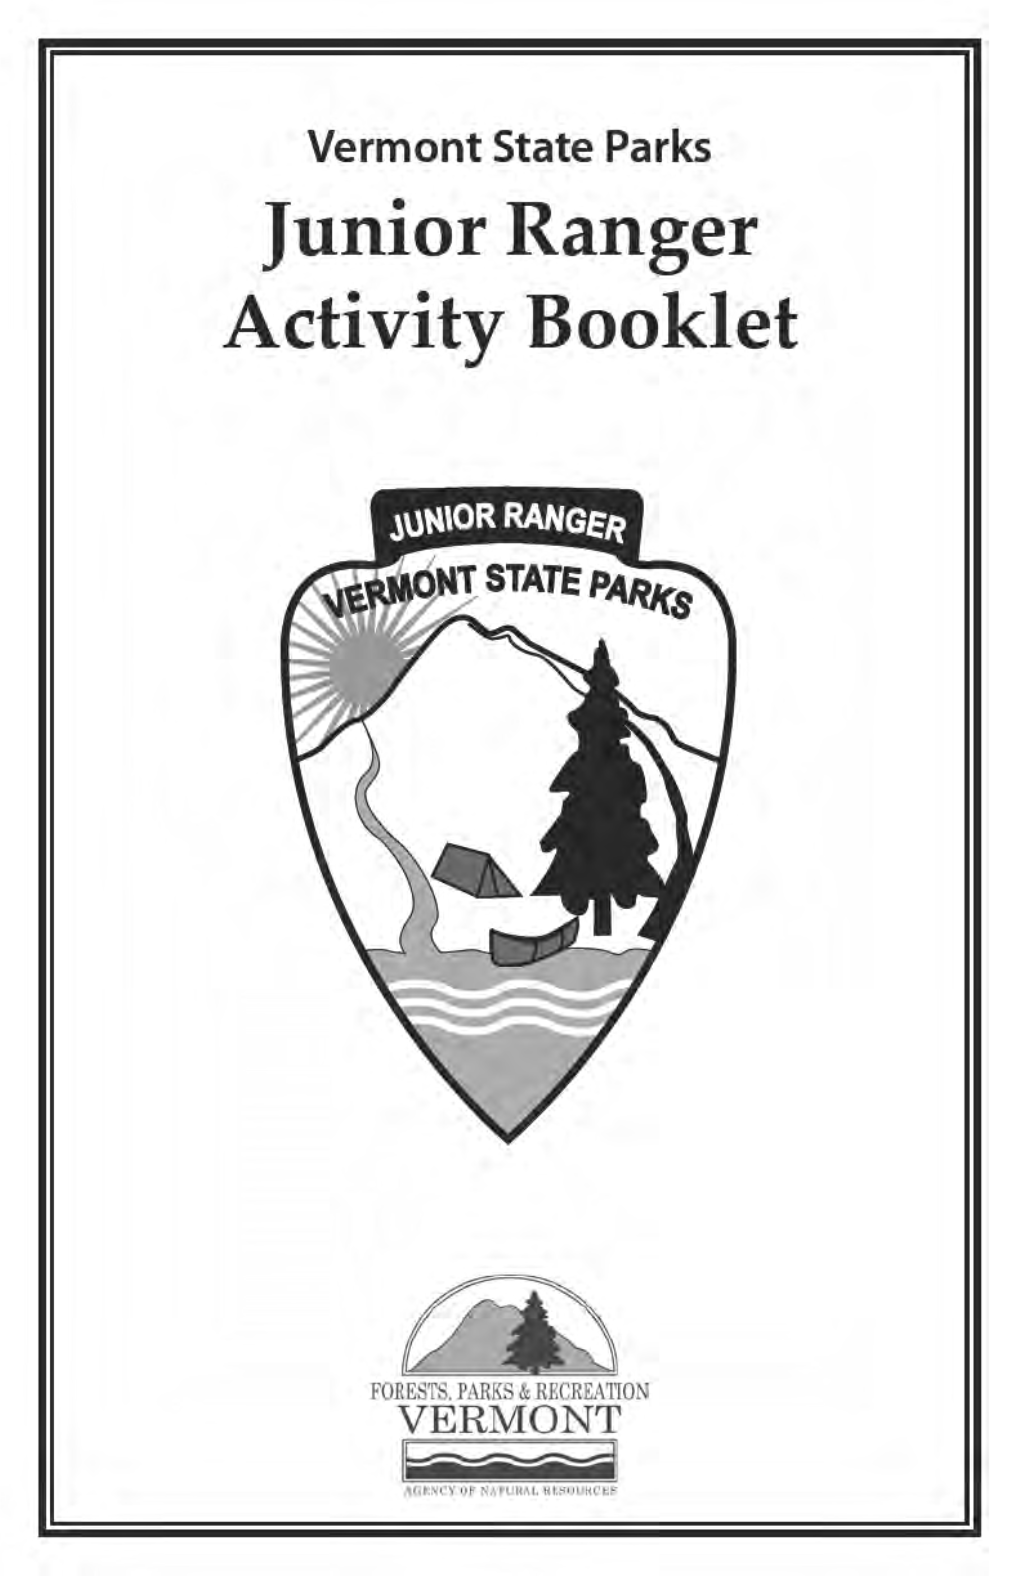 Become a Vermont State Parks Junior Ranger Help a Ranger What Do You Need to Do?